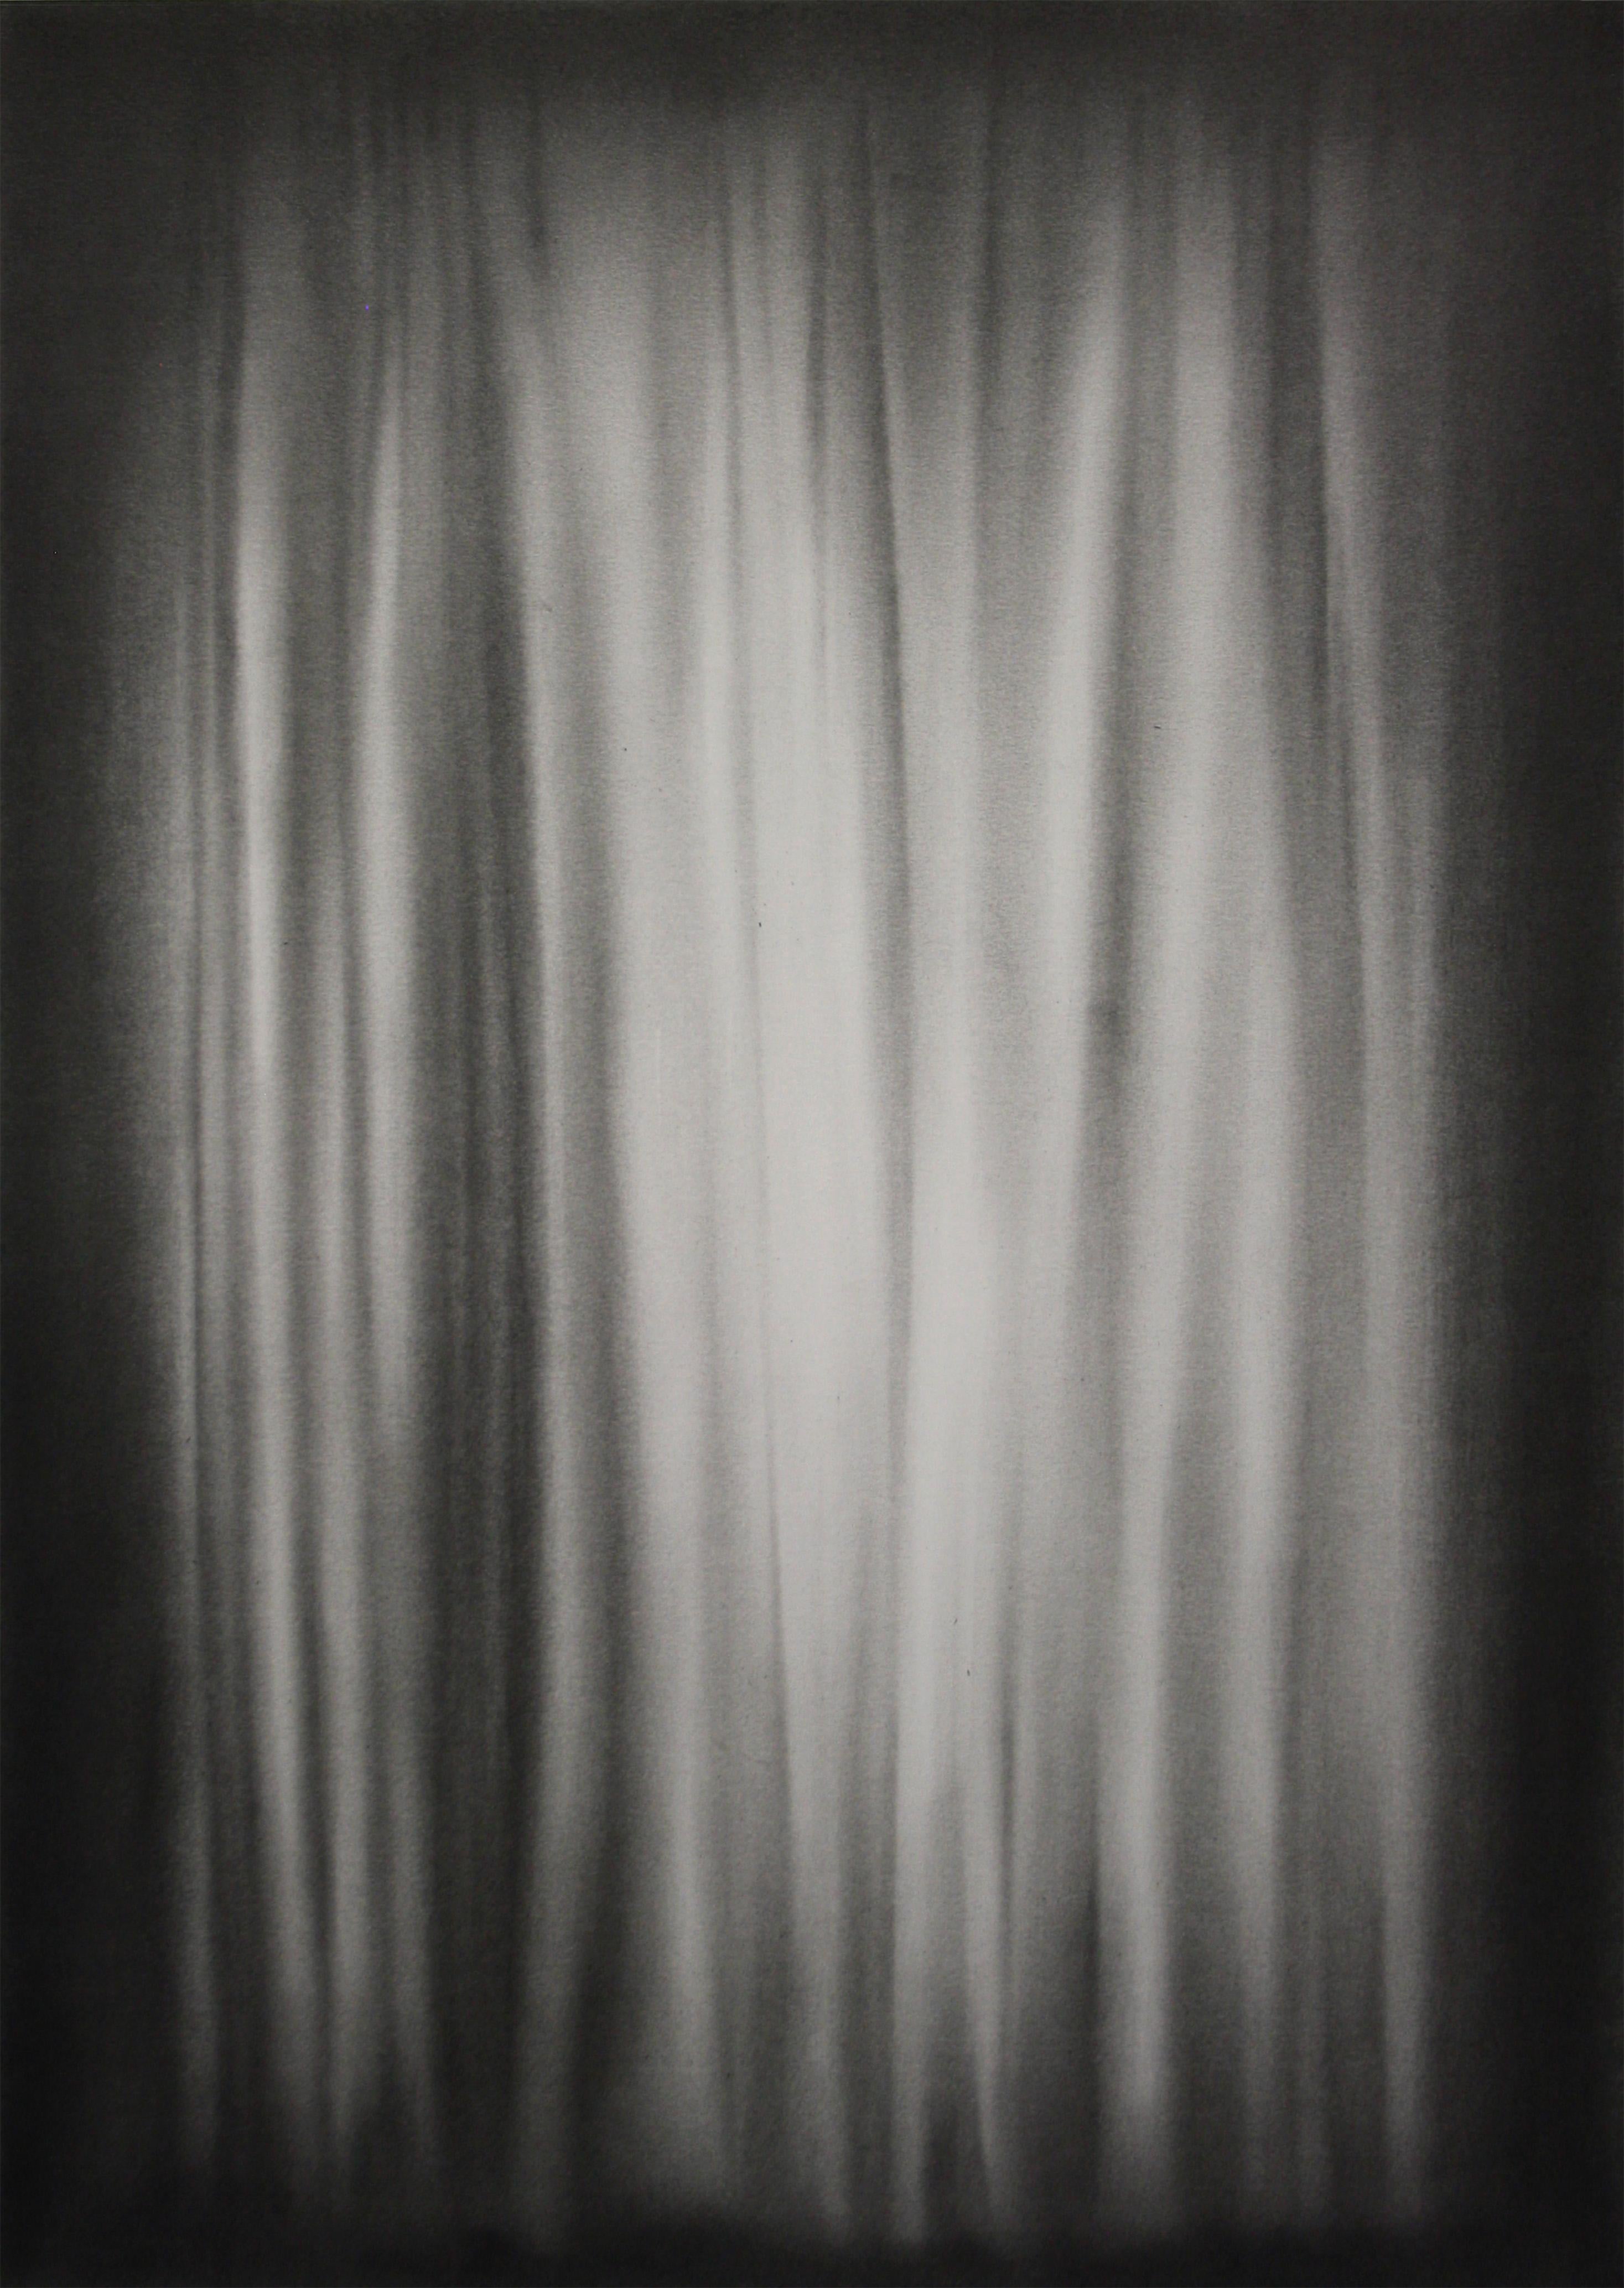 Simon Schubert
Untitled (Light through Curtain), 2015
Graphite on paper
25.5 x 19.5 inches

In Schubert’s most recent work, he continues exploring architectural details and empty domestic interiors with folded paper and graphite. The elaborate